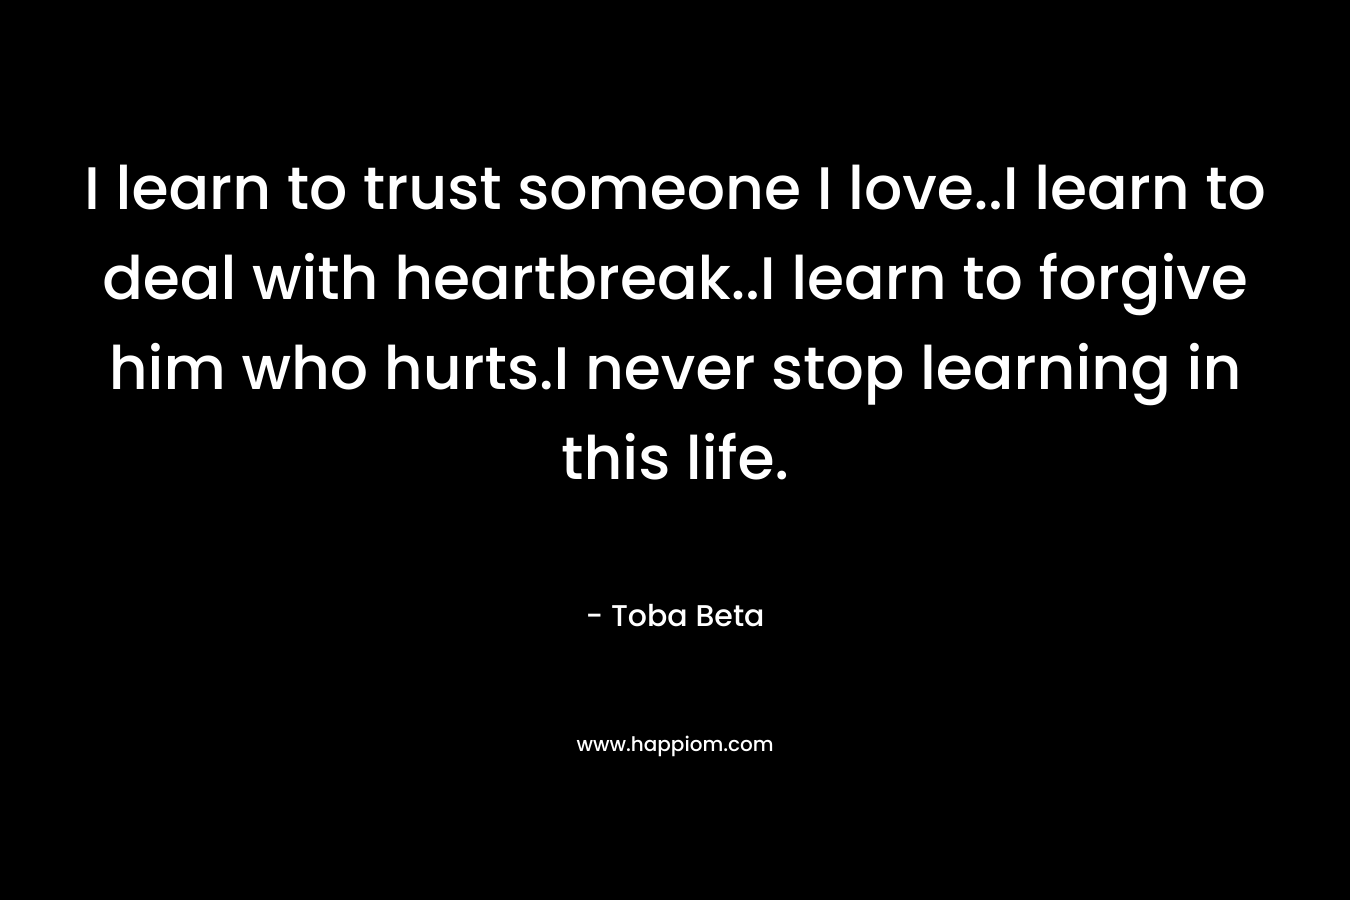 I learn to trust someone I love..I learn to deal with heartbreak..I learn to forgive him who hurts.I never stop learning in this life.